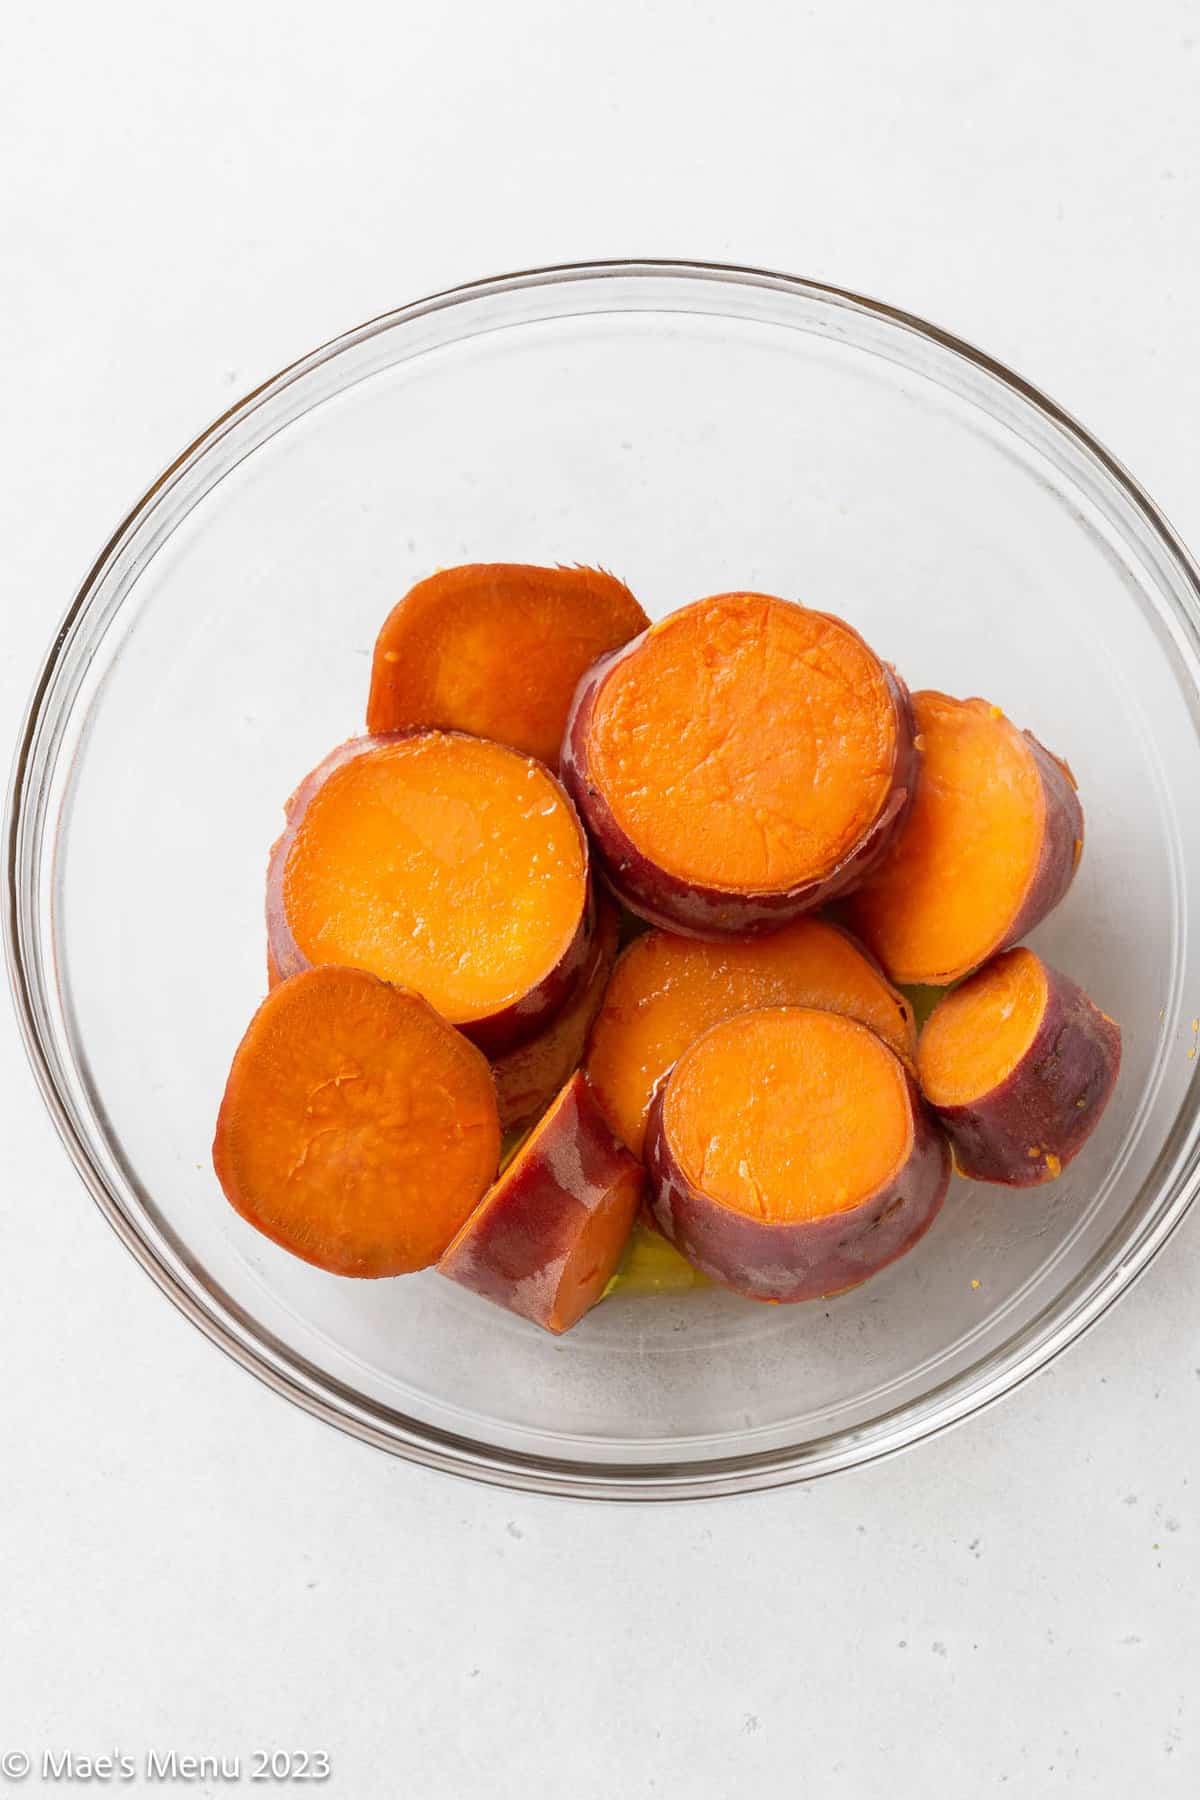 Tossing the boiled sweet potatoes with olive oil in a glass bowl.